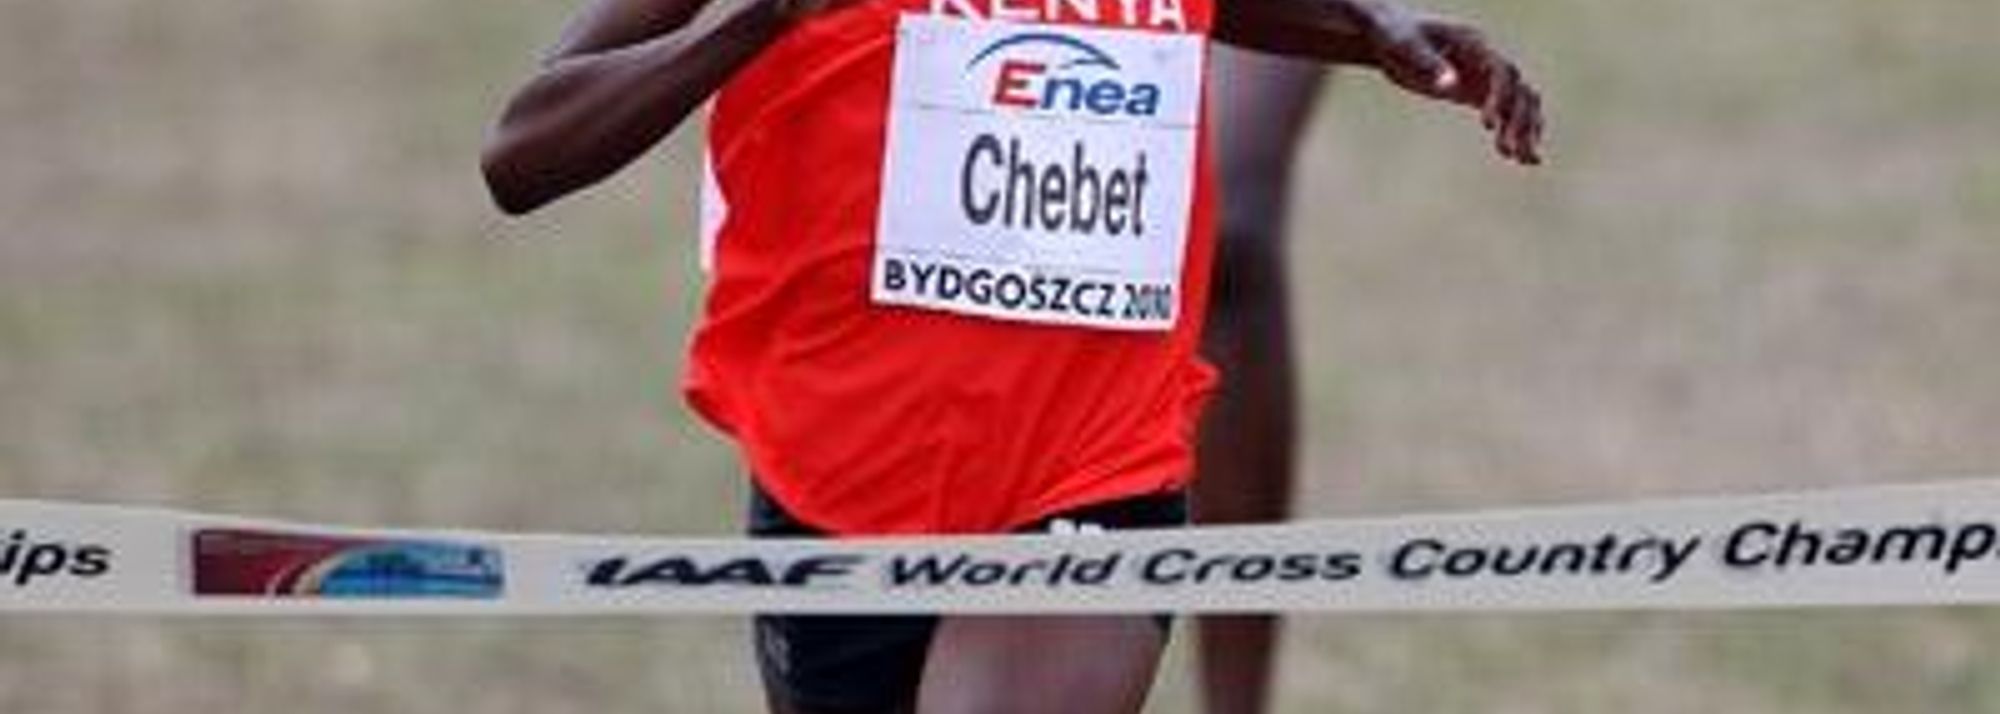 In many ways, Emily Chebet’s victory in the senior women’s race at the IAAF World Cross Country Championships harked back to earlier, and simpler, times. Back to the days when the World Cross Country was a race that went to the athlete who ran best on the day and when the identity of that athlete would, as often as not, come as a surprise.<br><br>